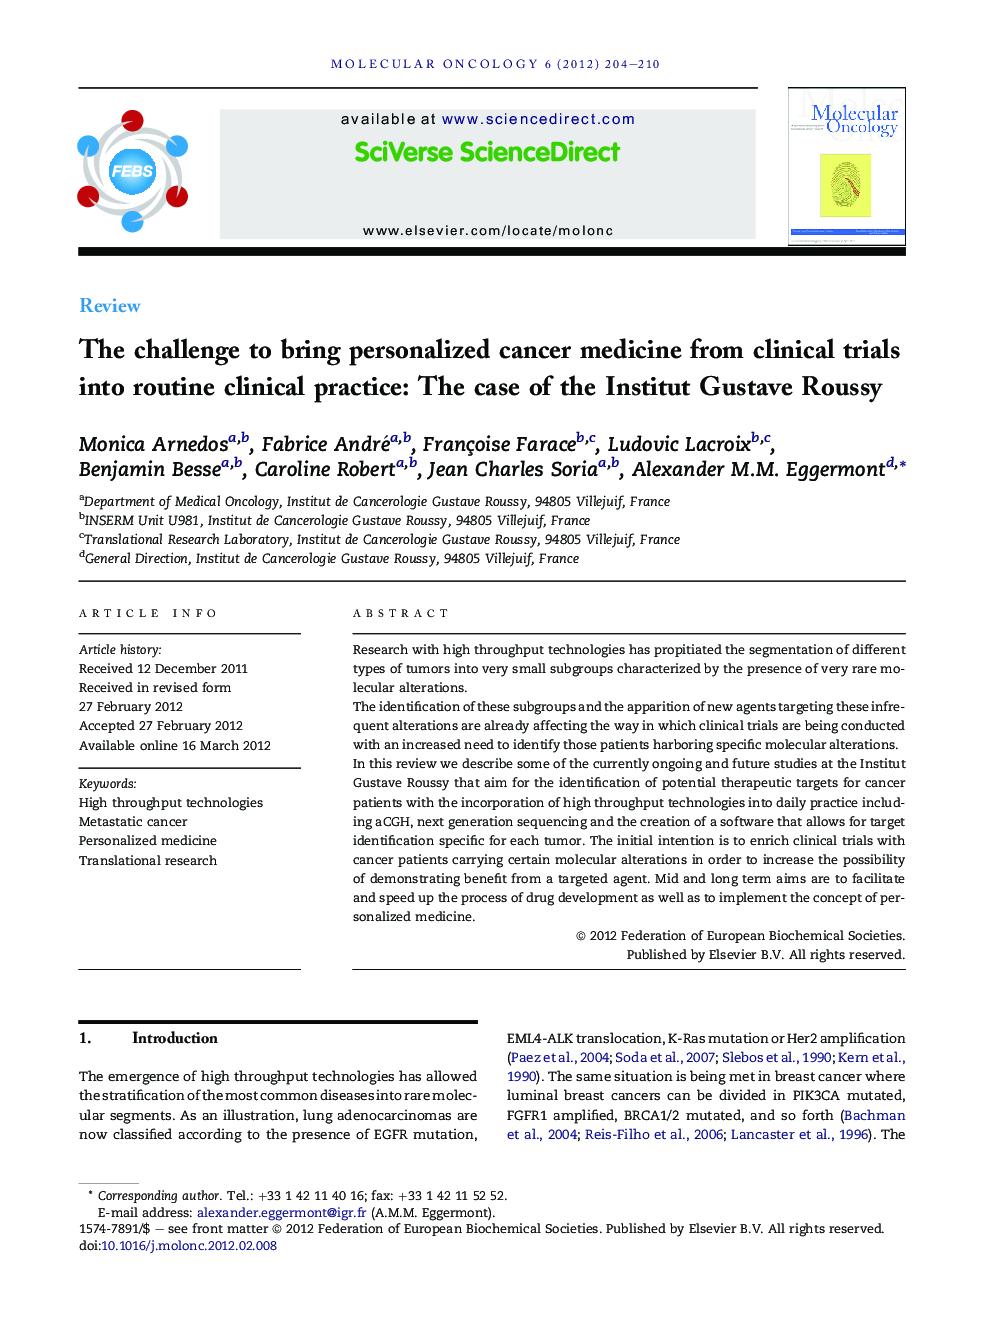 The challenge to bring personalized cancer medicine from clinical trials into routine clinical practice: The case of the Institut Gustave Roussy